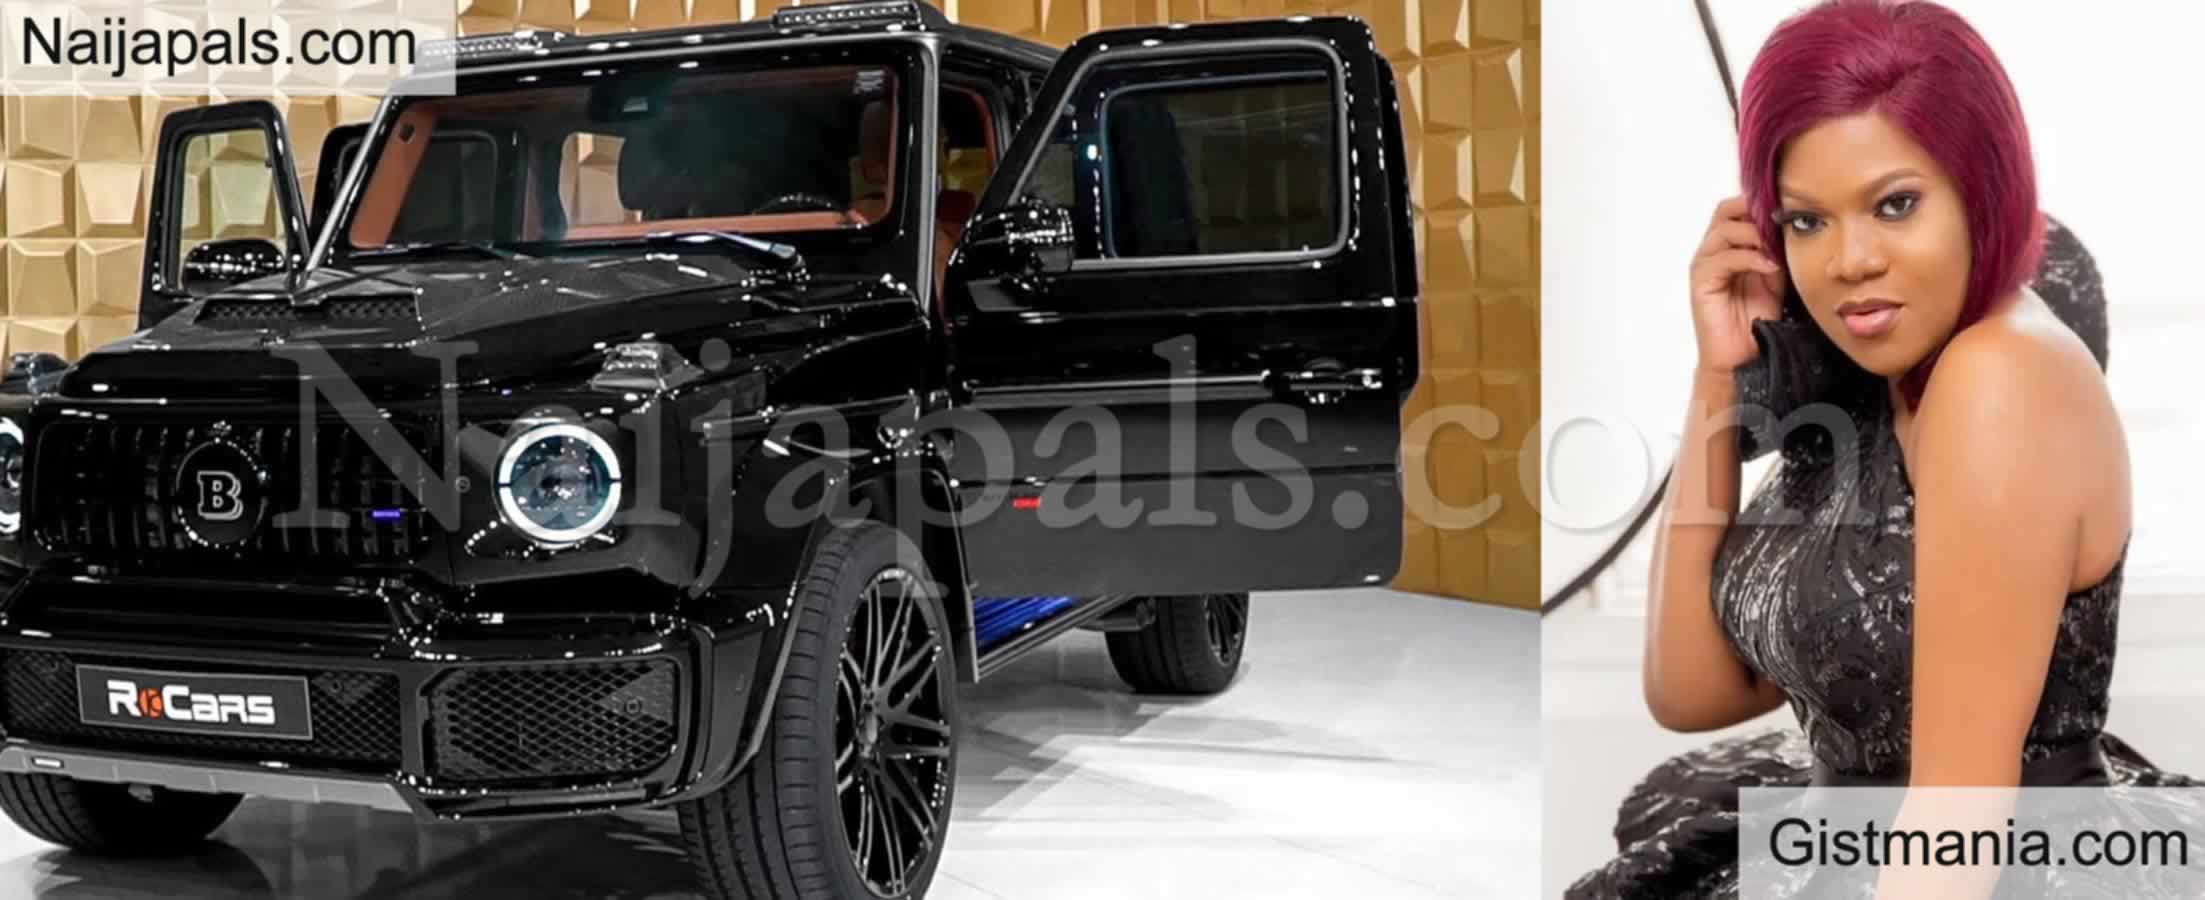 Nigerian Actress Toyin Abraham Flaunts Her New Mercedes Benz G Wagon Brabus She Just Acquired Gistmania